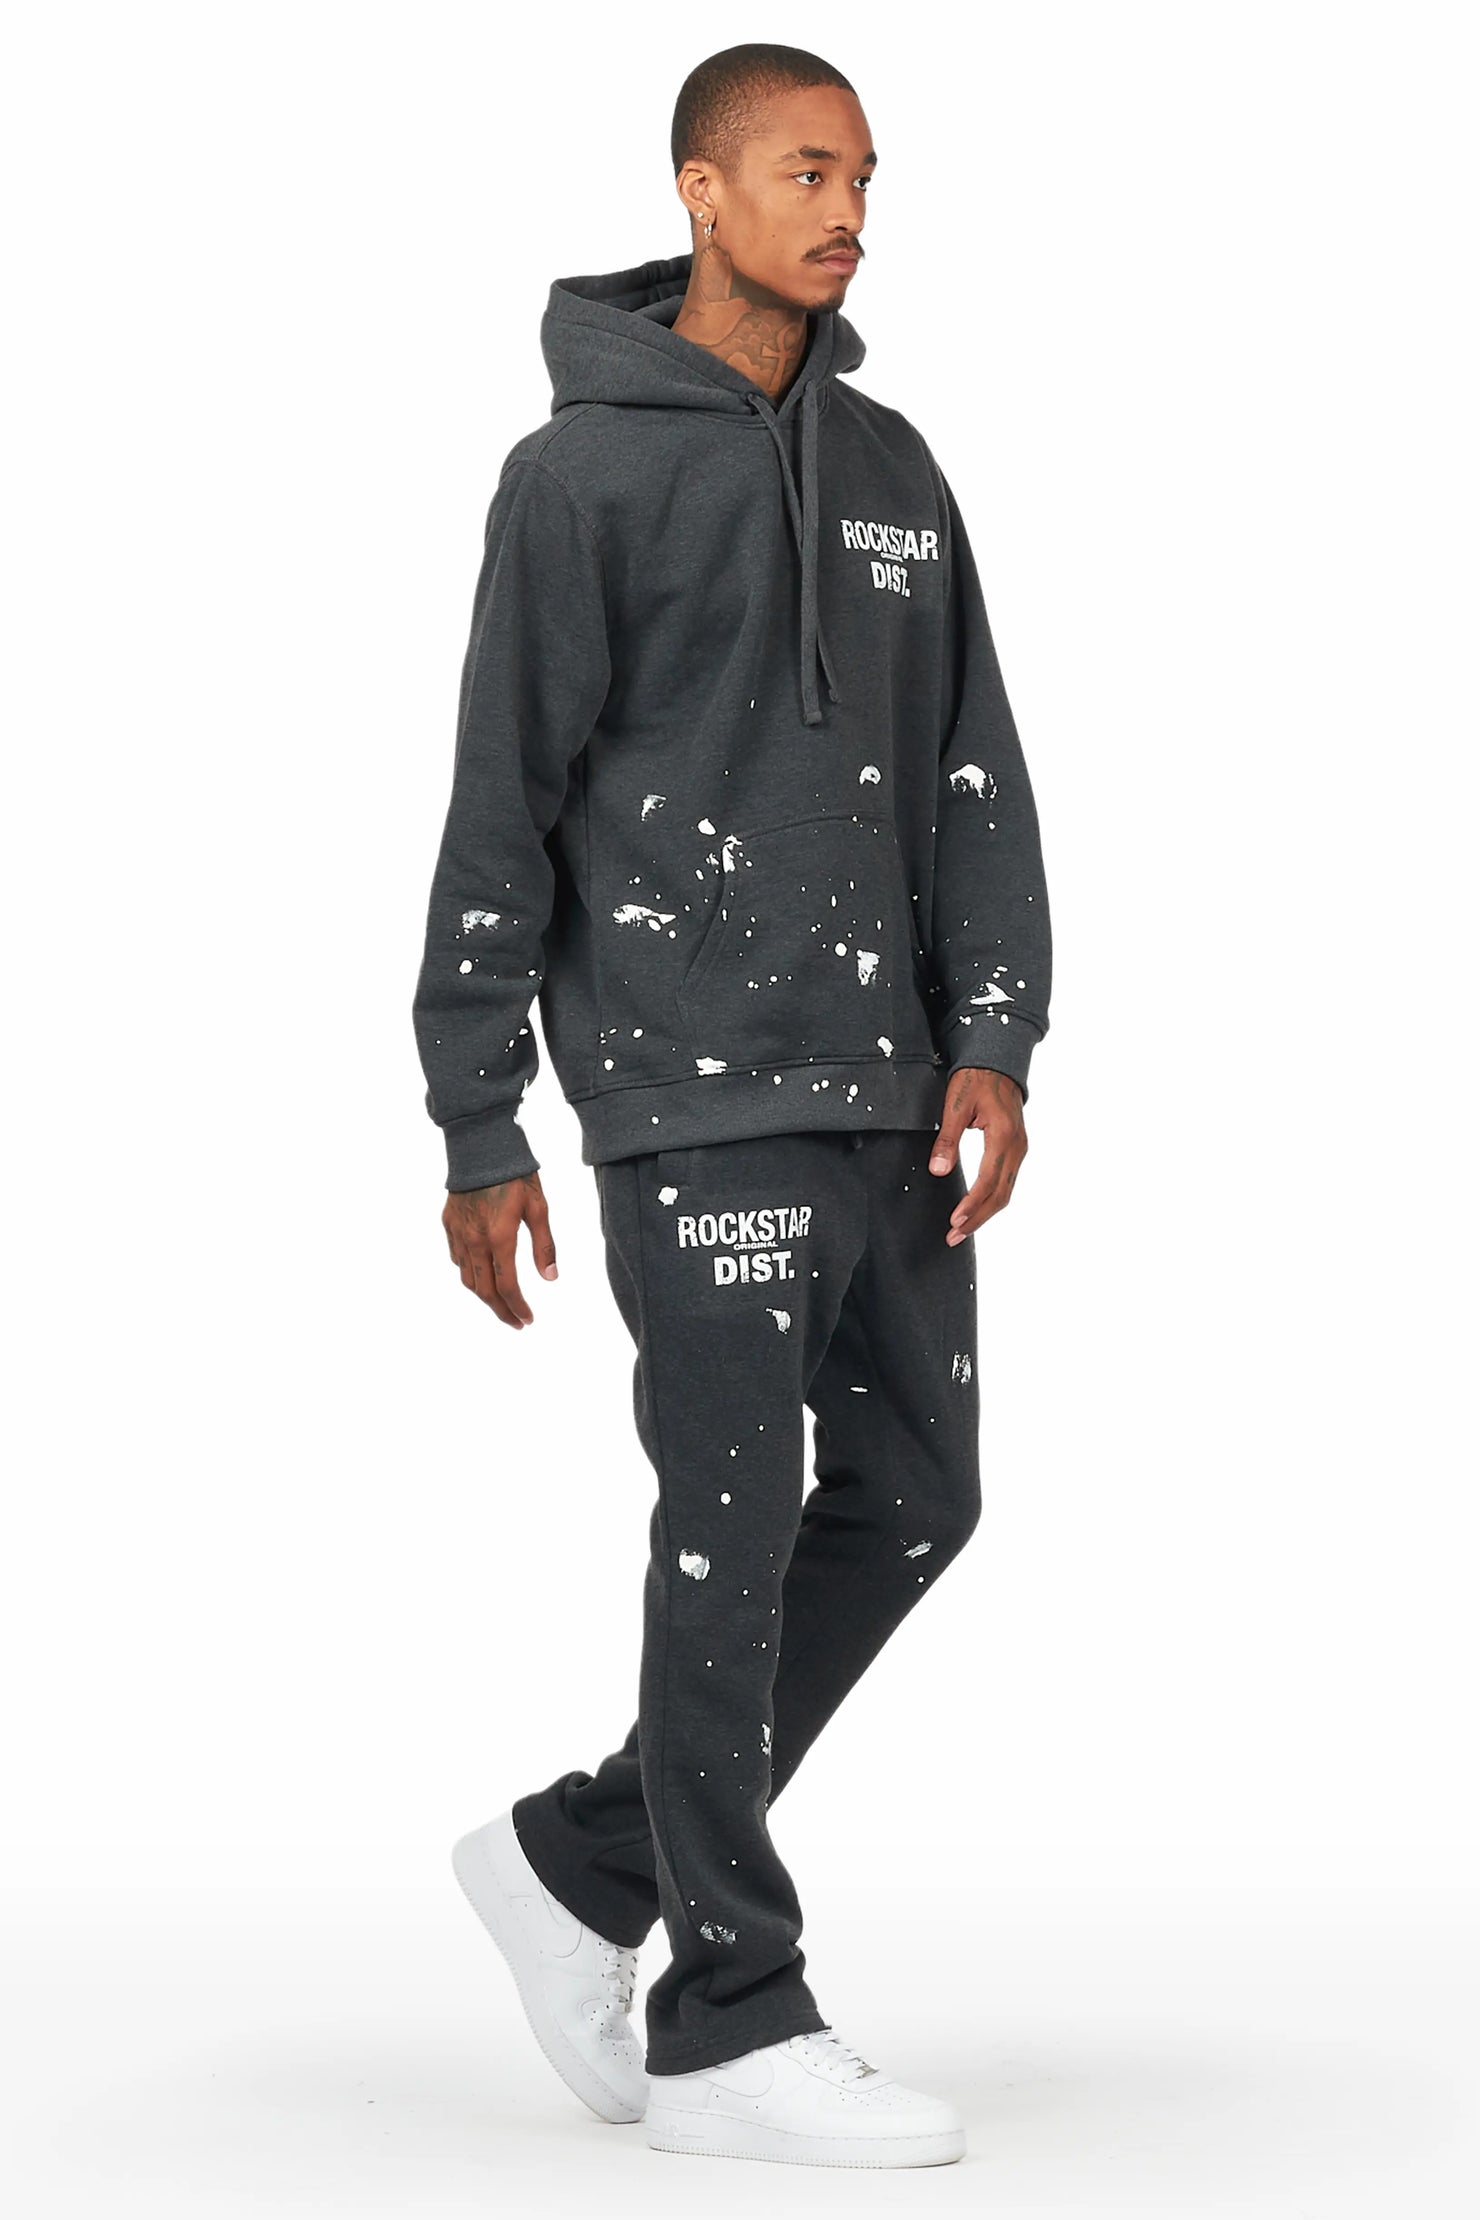 Raffer Charcoal Hoodie/Stacked Flare Pant Set